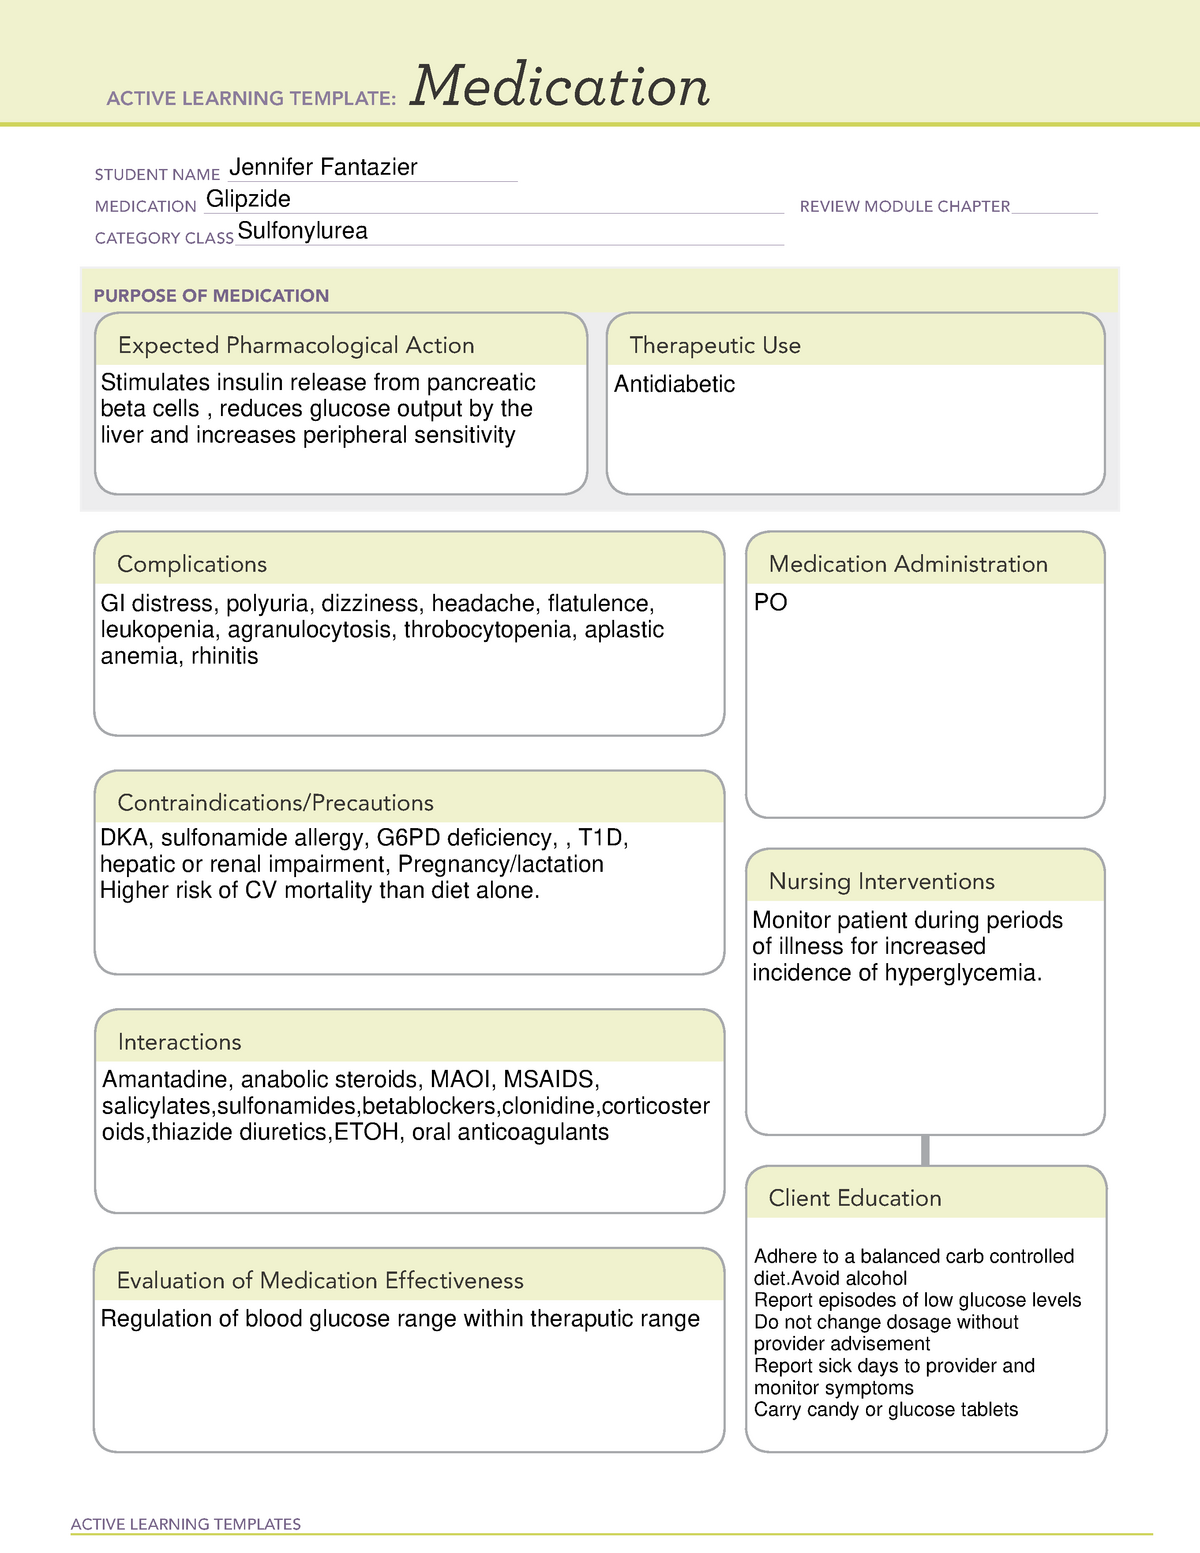 glipizide-active-learning-templates-medication-student-name